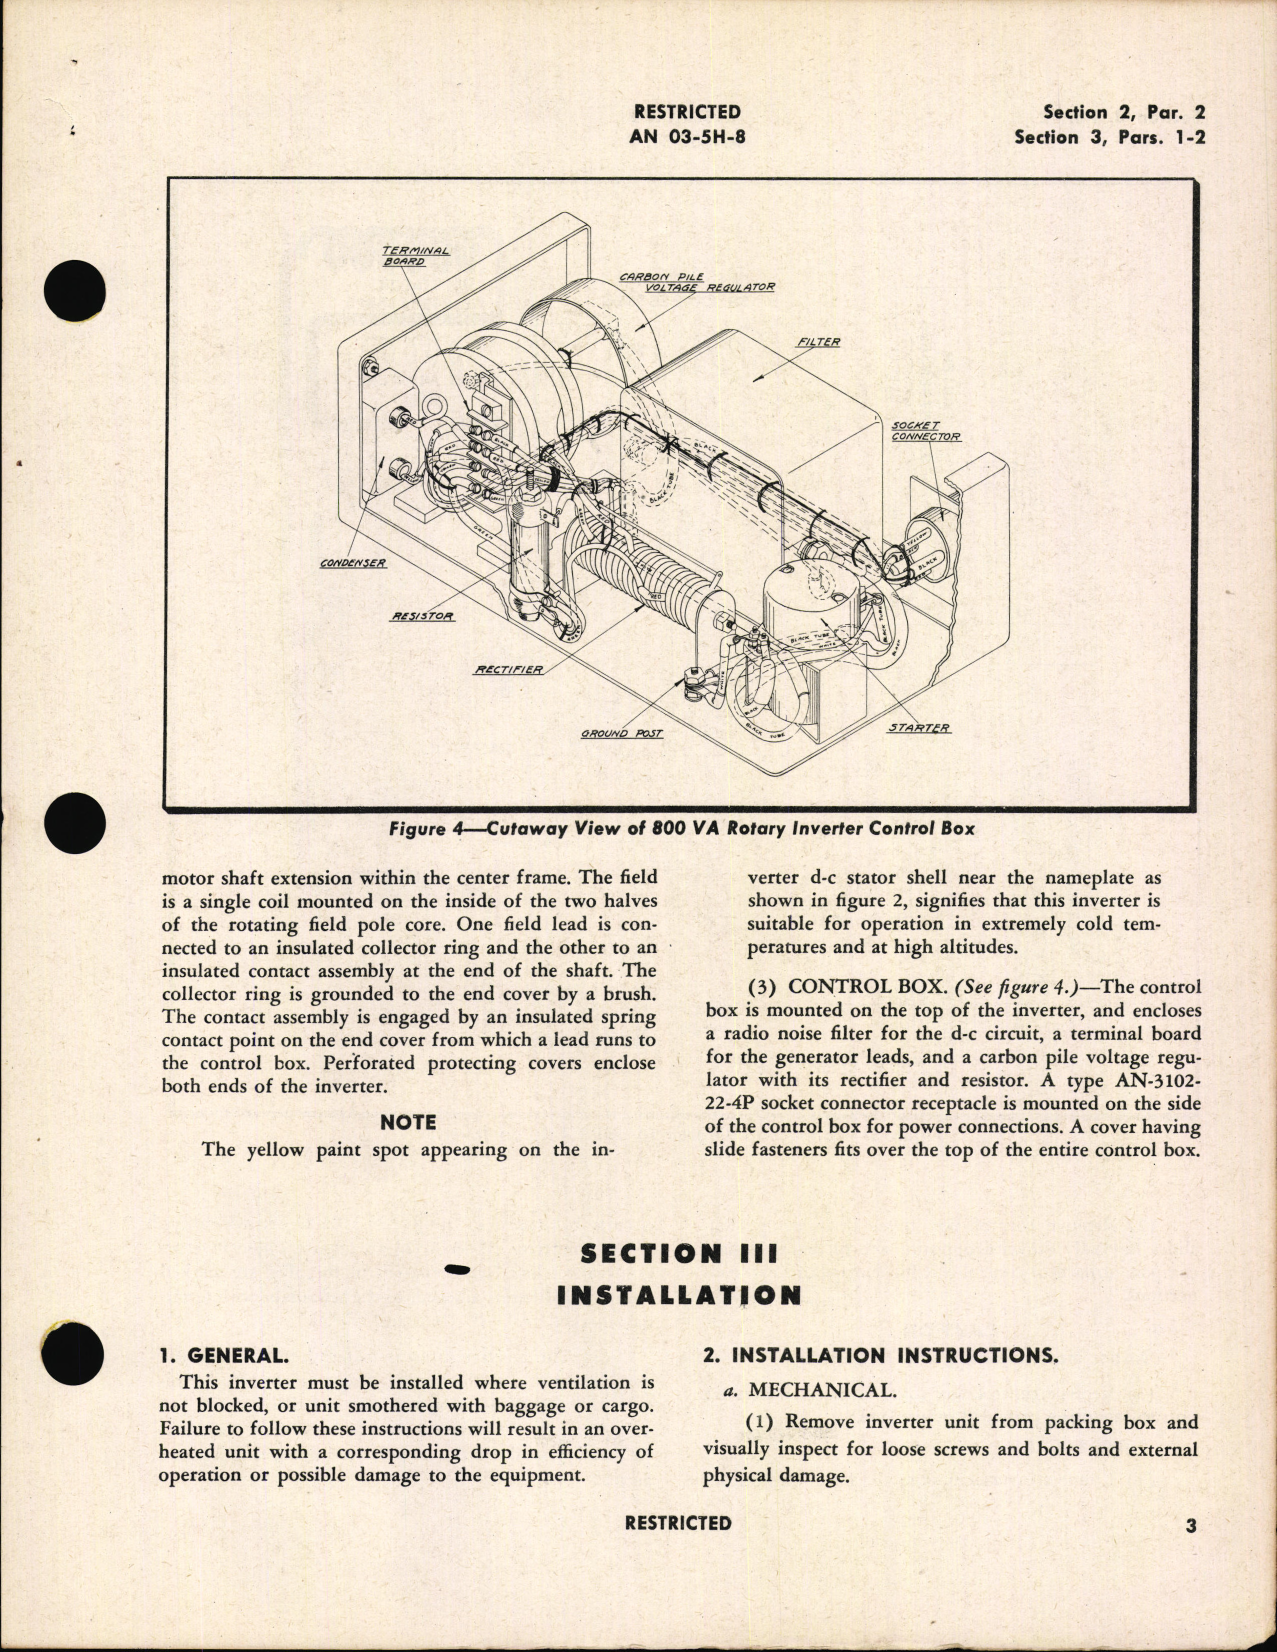 Sample page 7 from AirCorps Library document: Handbook of Instructions with Parts Catalog for 800 VA Rotary Inverter